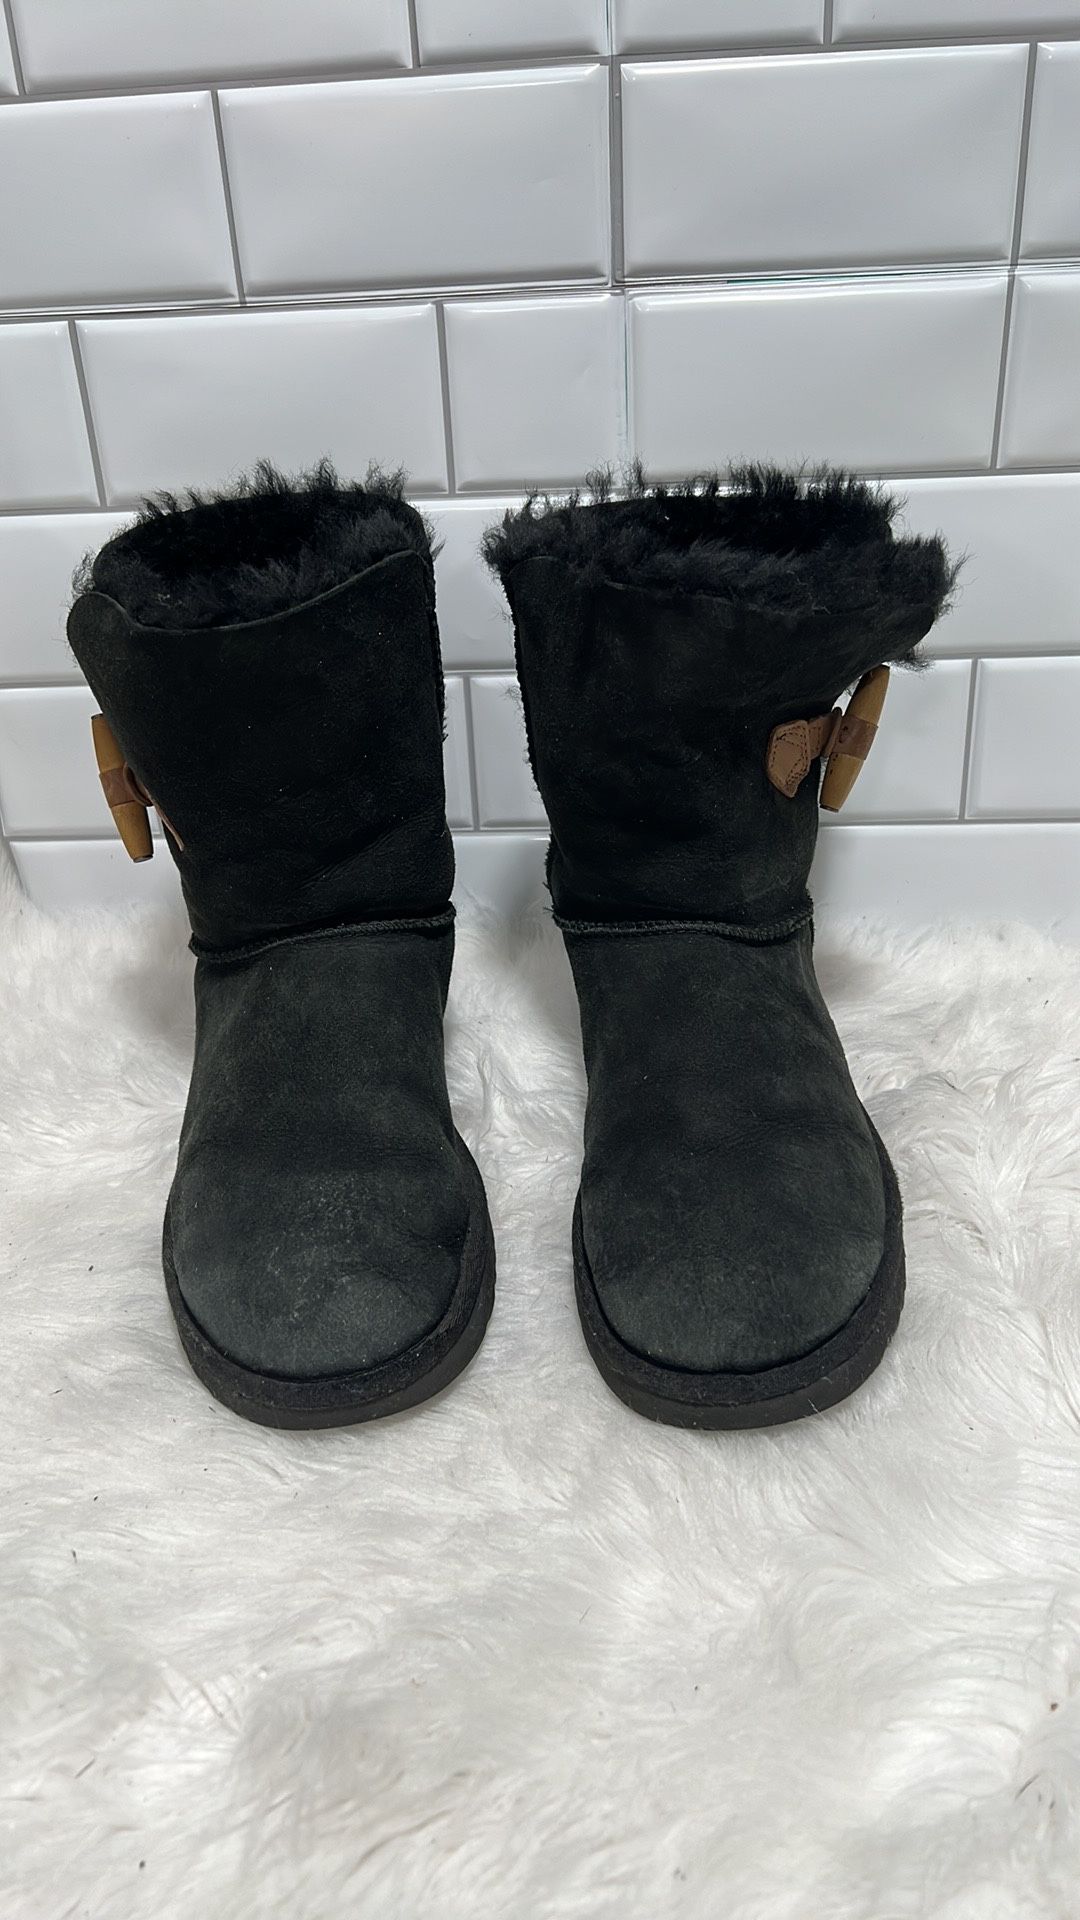 UGG WOMEN'S KEELY SHEARLING LINED BOOTIES,BLACK, US SIZE 9